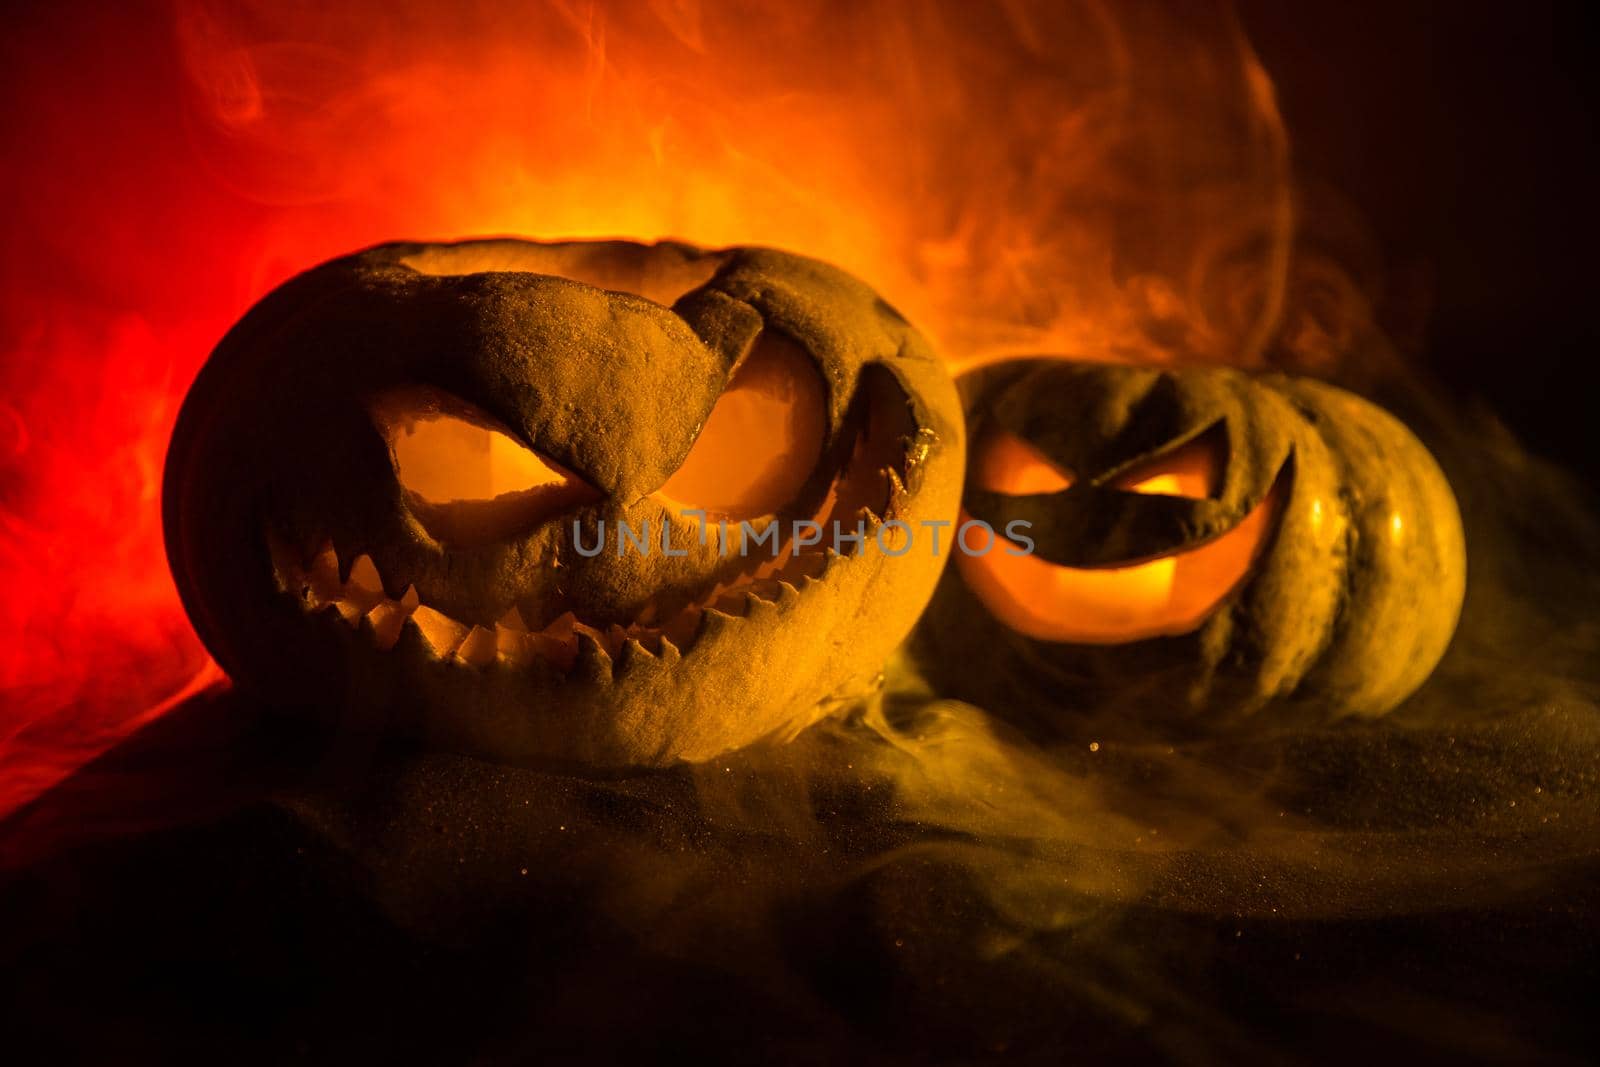 Halloween pumpkin smile and scary eyes for party night. Close up view of scary Halloween pumpkin with eyes glowing inside at black background. Selective focus